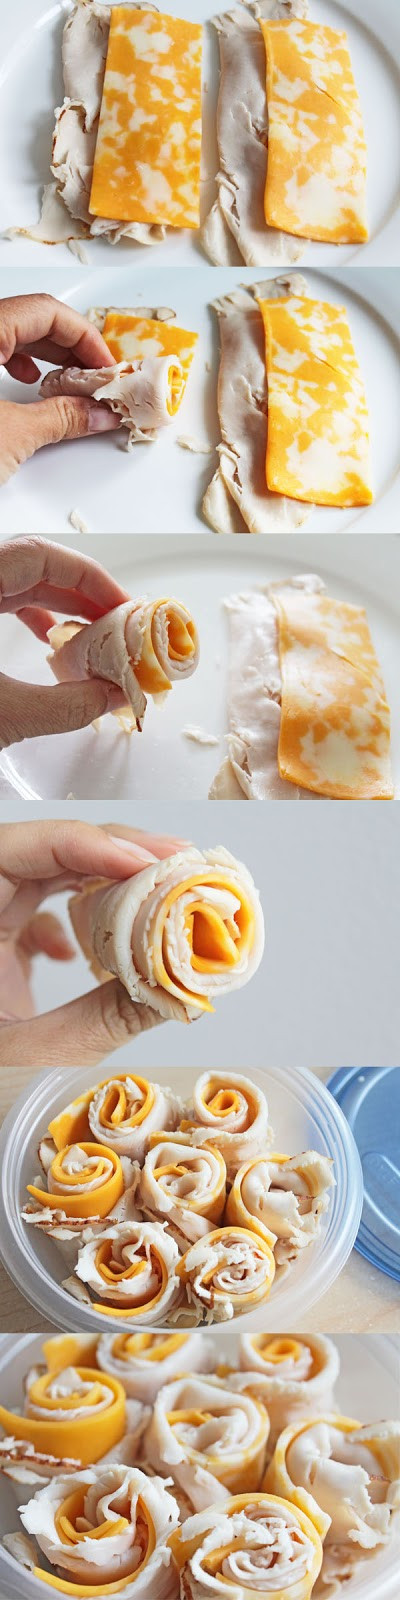 Easy To Make Healthy Snacks
 Easy to Make Snacks Turkey and Cheese Rolls Recipe